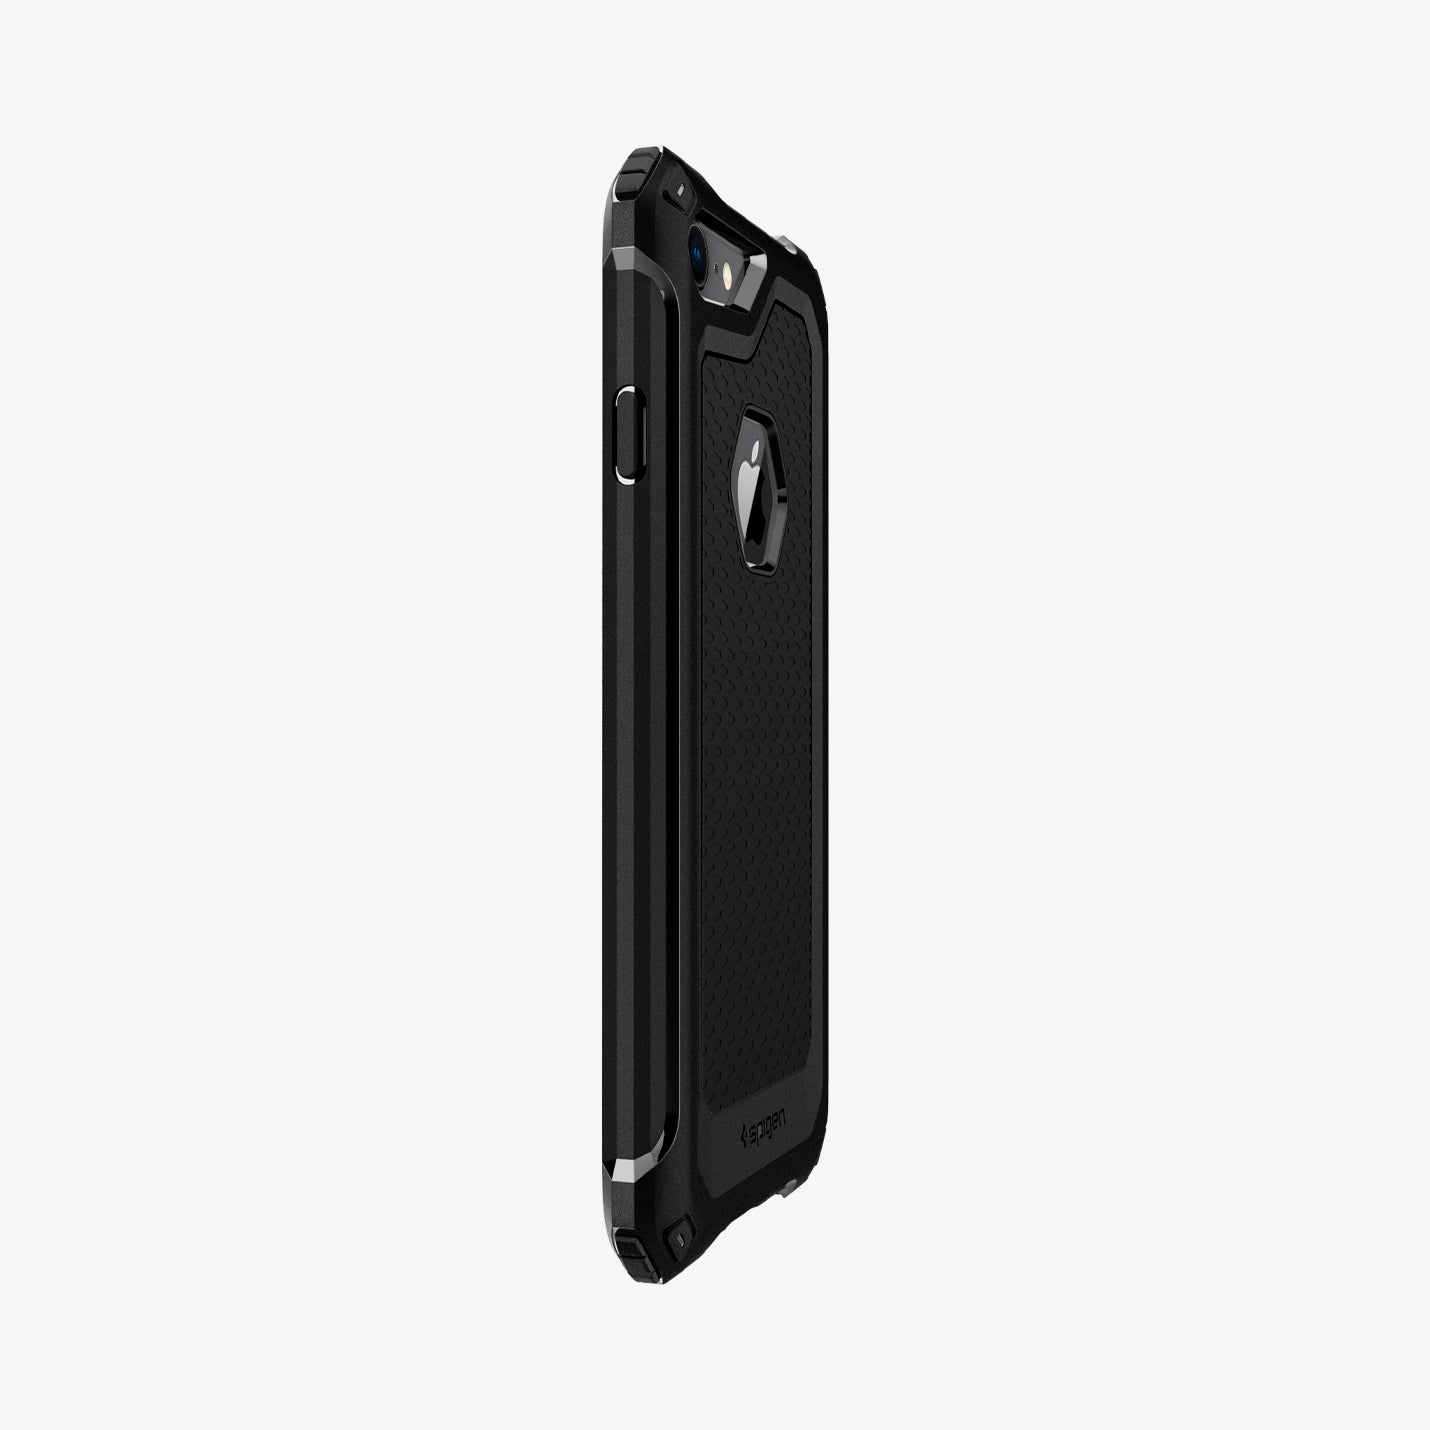 042CS21491 - iPhone 8 Case Rugged Armor Extra in Black showing the partial back and partial side